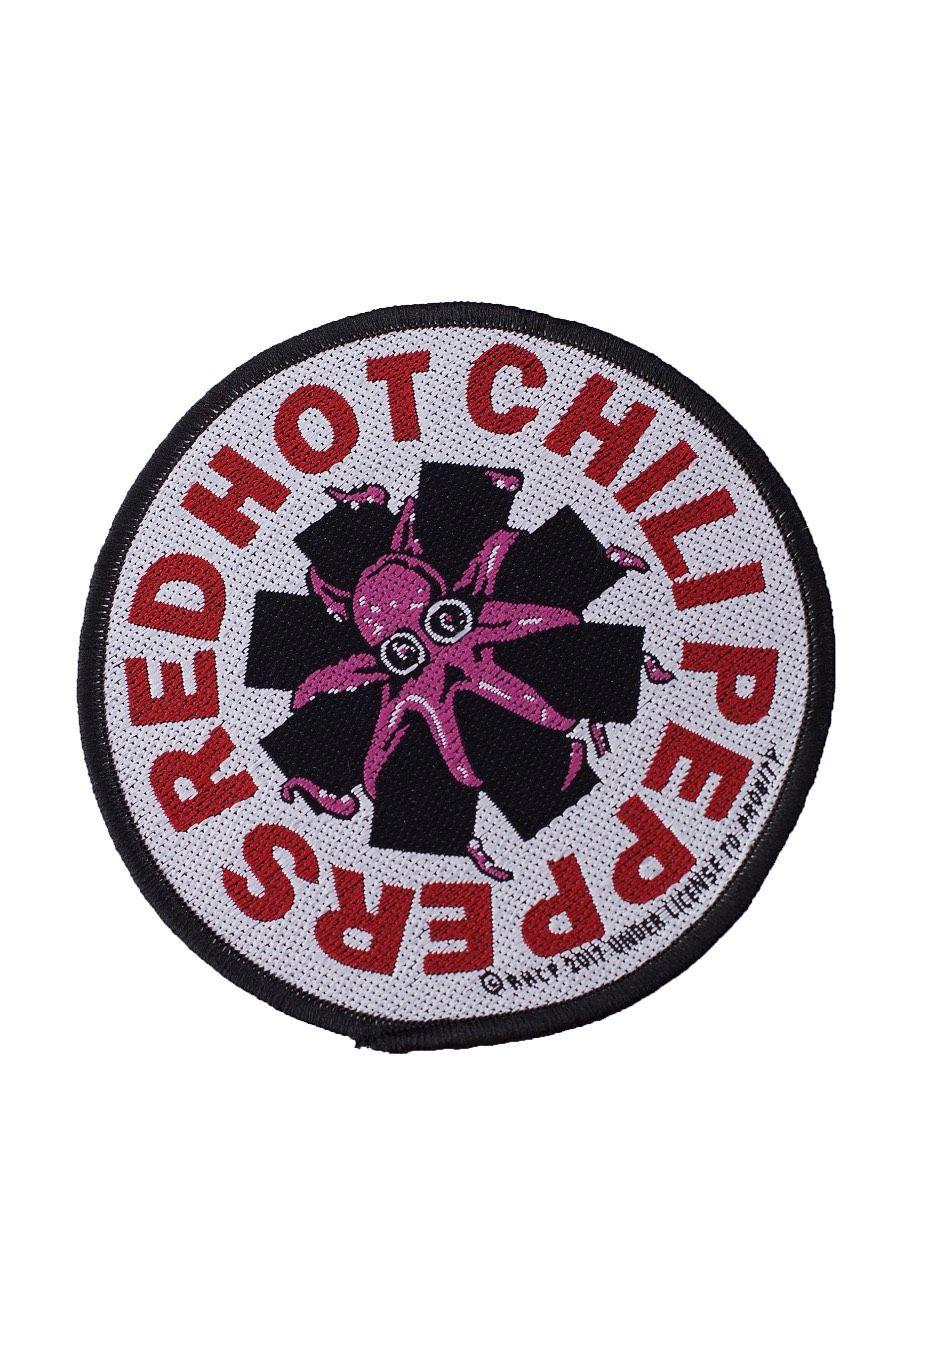 Red Hot Chili Peppers Logo - Red Hot Chili Peppers - Octopus - Patch